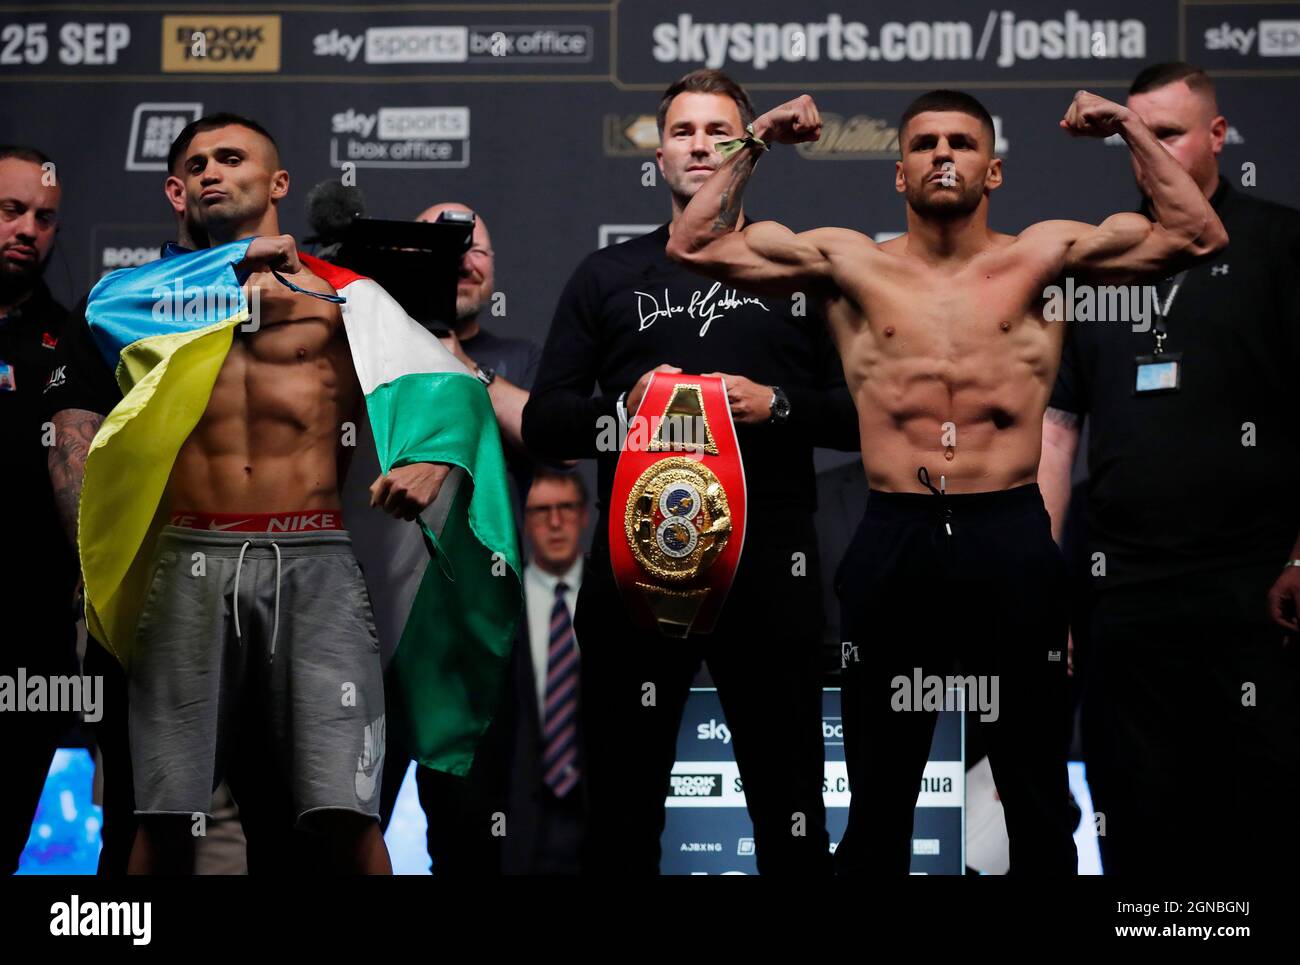 Boxing - Anthony Joshua v Oleksandr Usyk Weigh-in - The O2, London, Britain  - September 24, 2021 Maxim Prodan and Florian Marku during the weigh-in  Action Images via Reuters/Andrew Couldridge Stock Photo - Alamy